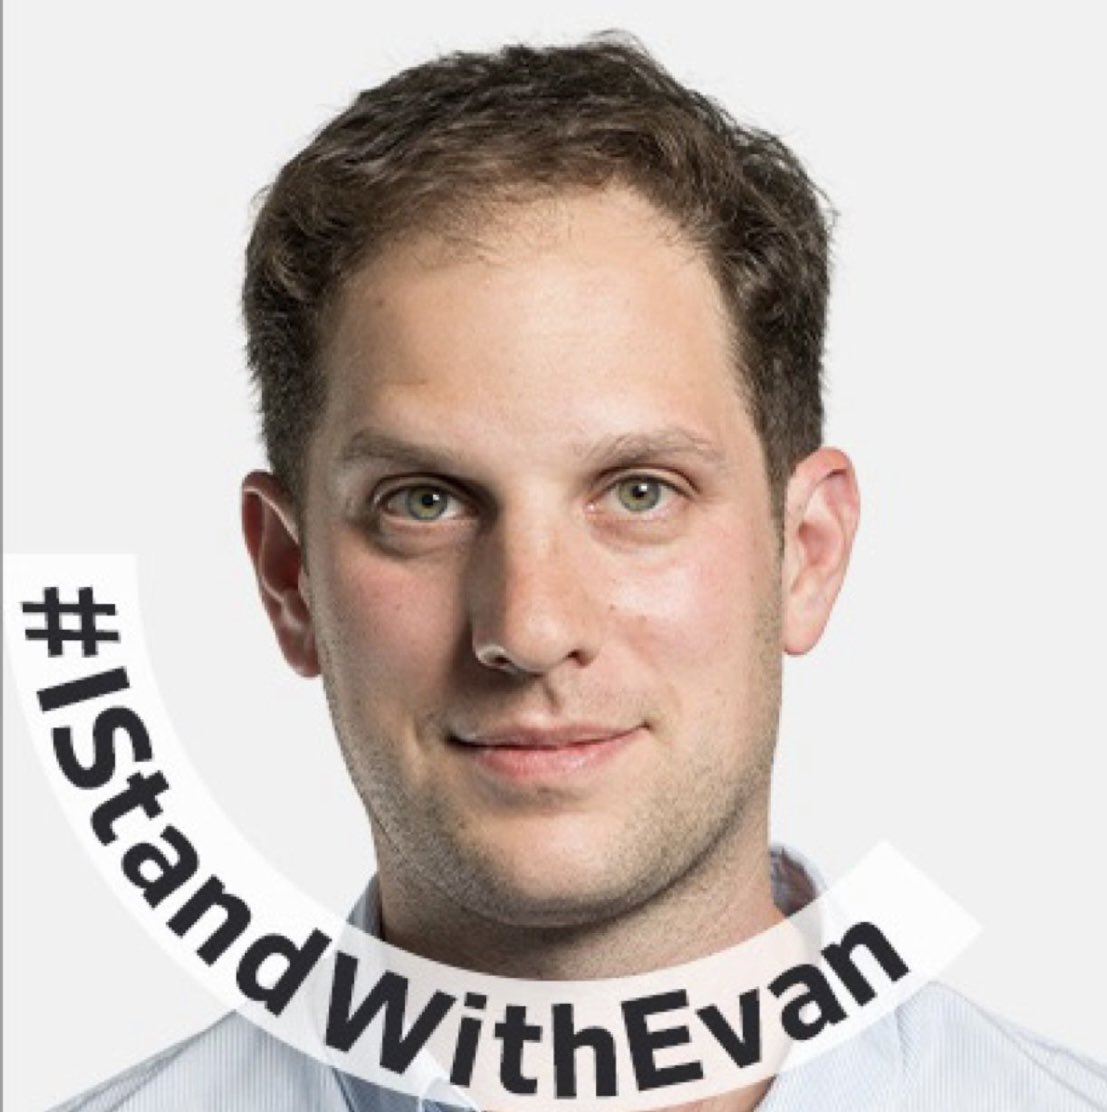 Scripps News stands with Evan Gershkovich, the Wall Street Journal, and for freedom of the press. #IStandWithEvan